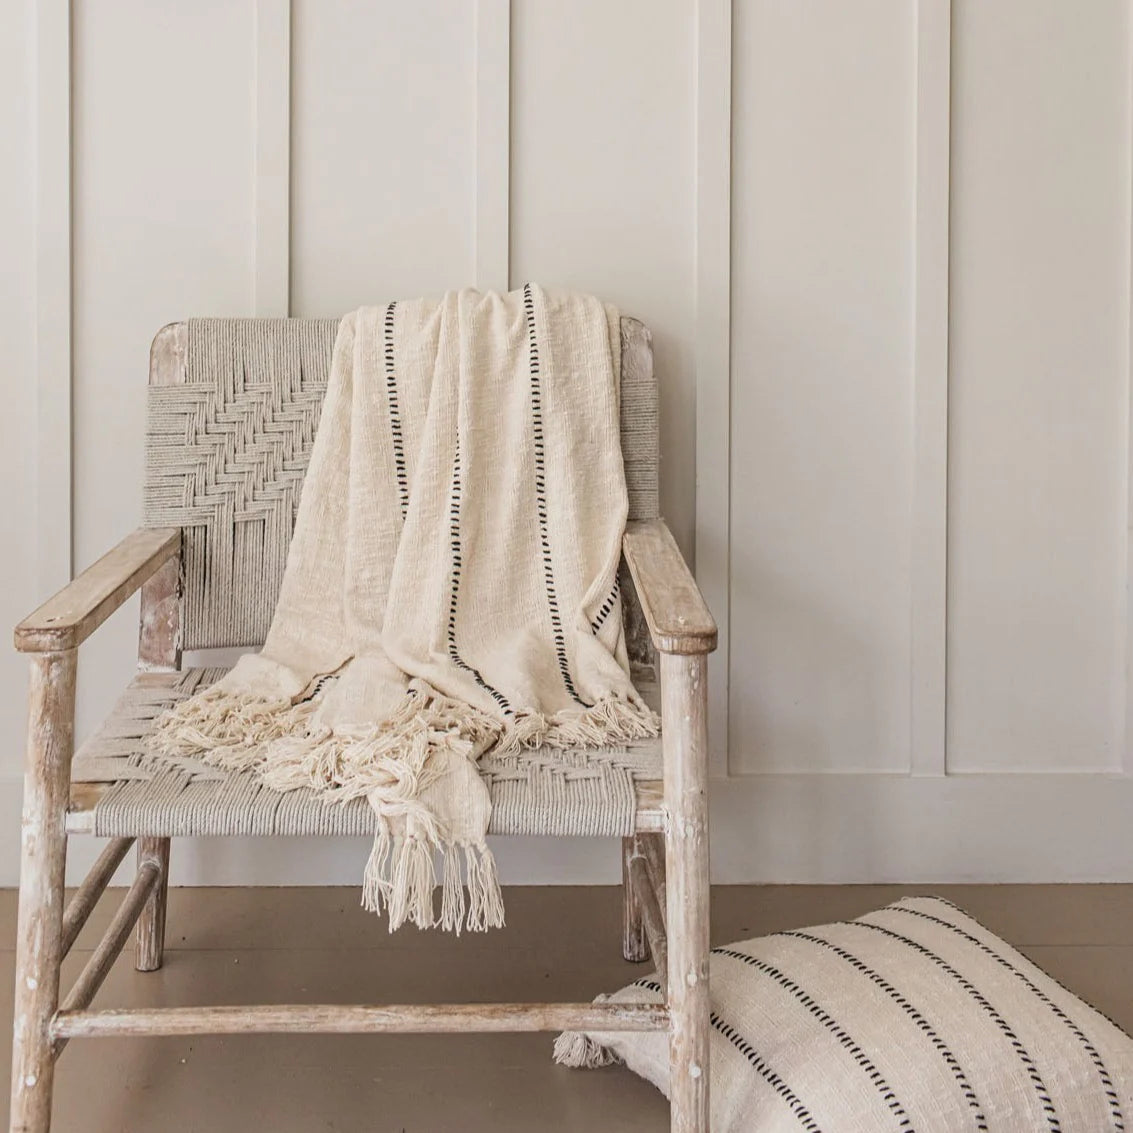 A striped neutral throw blanket is draped over a woven armchair with a matching cushion on the floor.